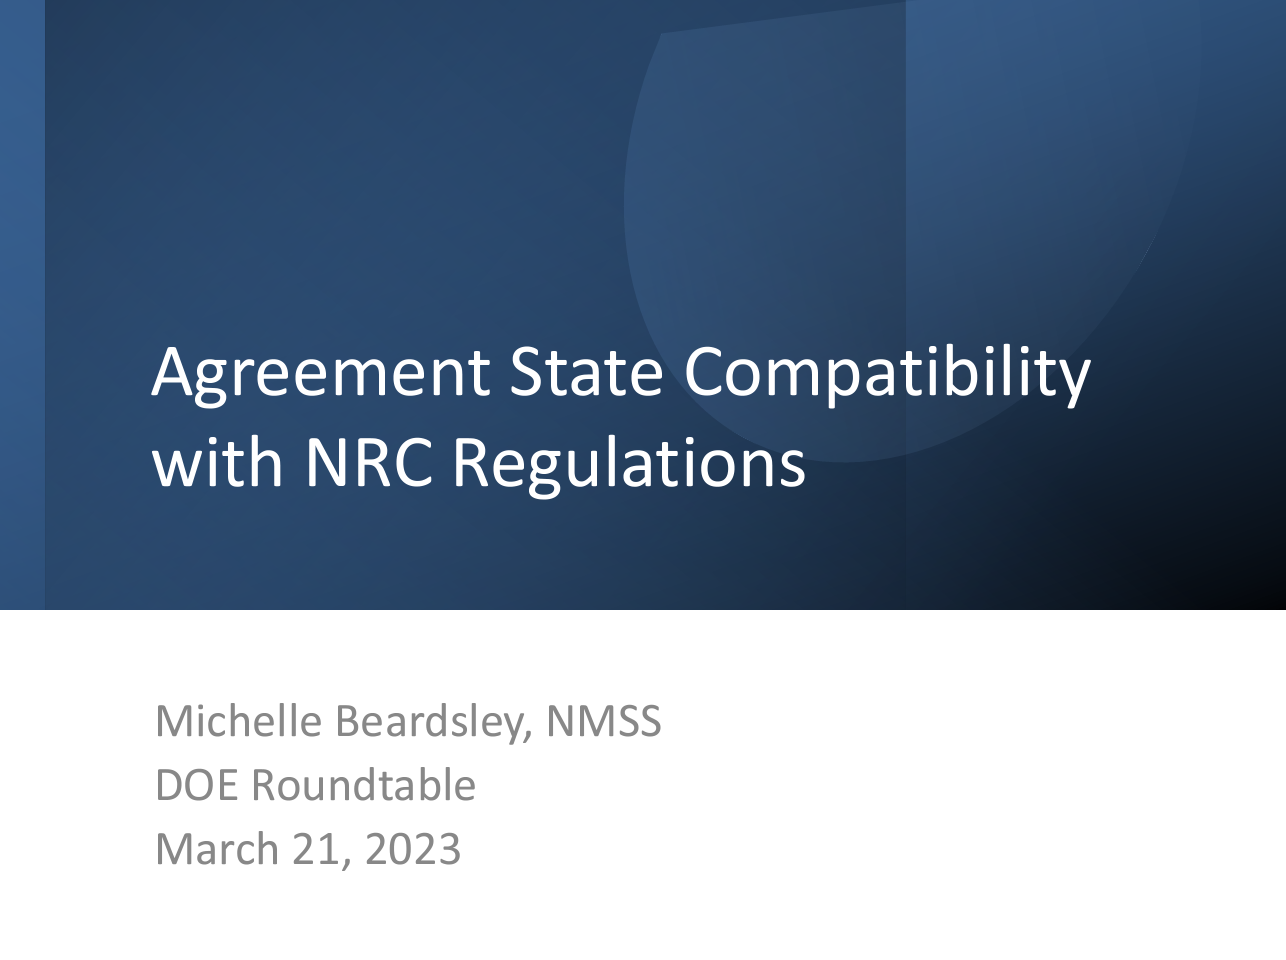 Agreement State Compatibility with NRC Regulations - Michelle Beardsley, NMSS